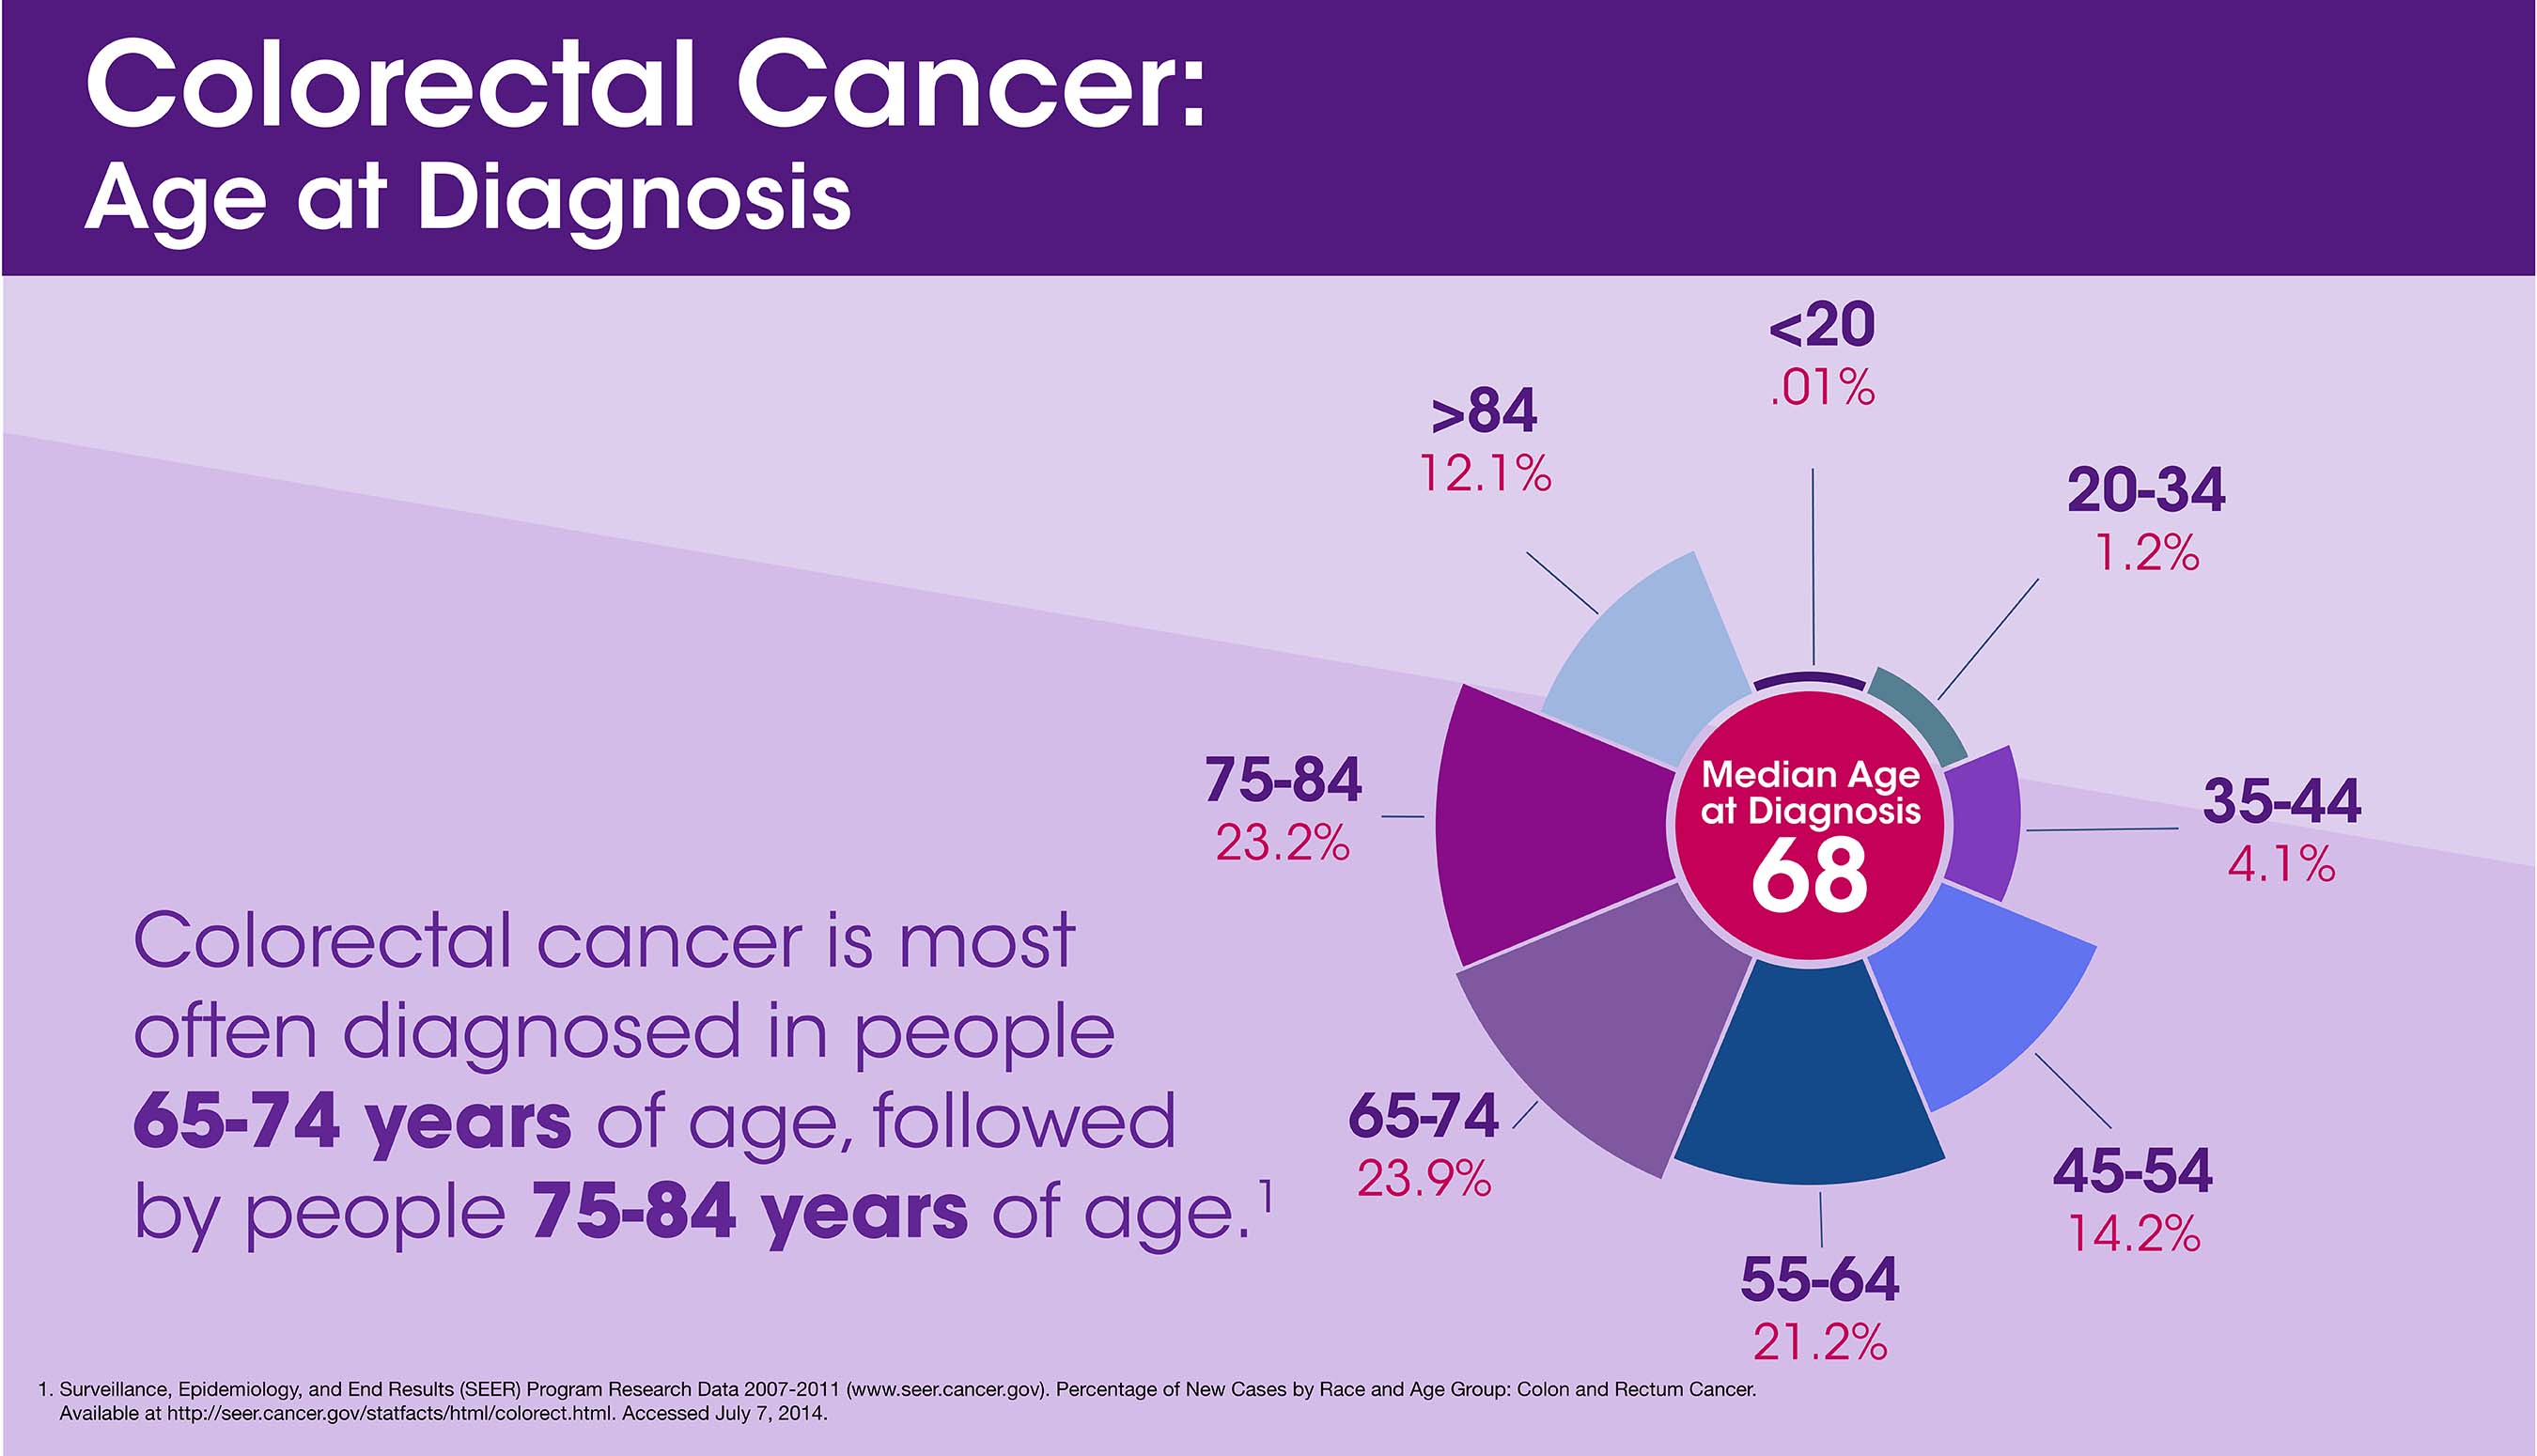 Colorectal Cancer: Age at Diagnosis